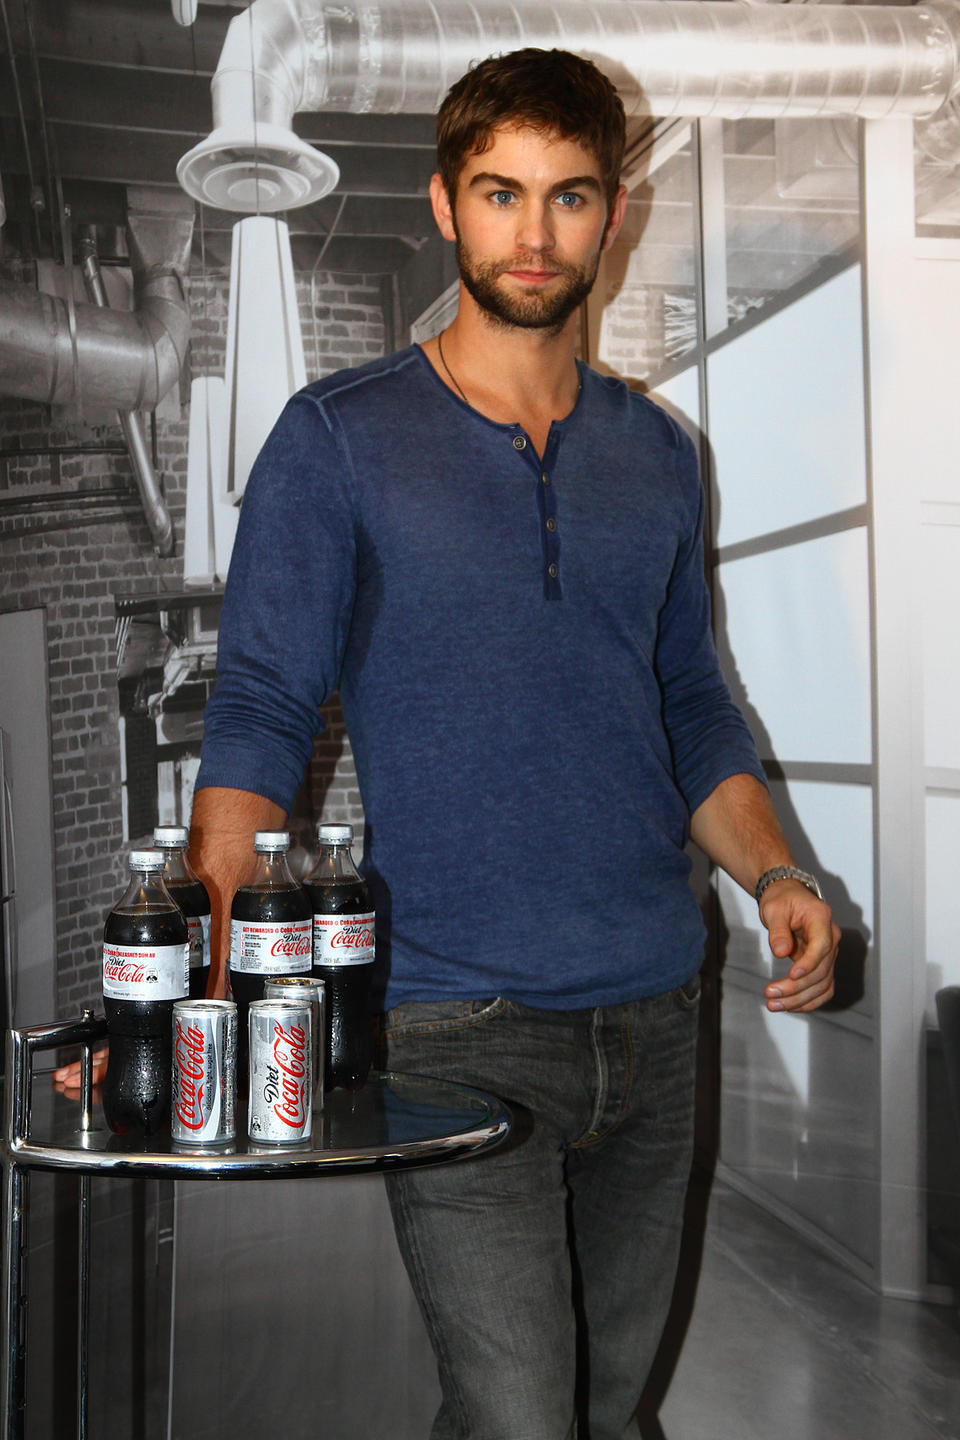 Chace Crawford Greets Fans At A Diet Coke Promo